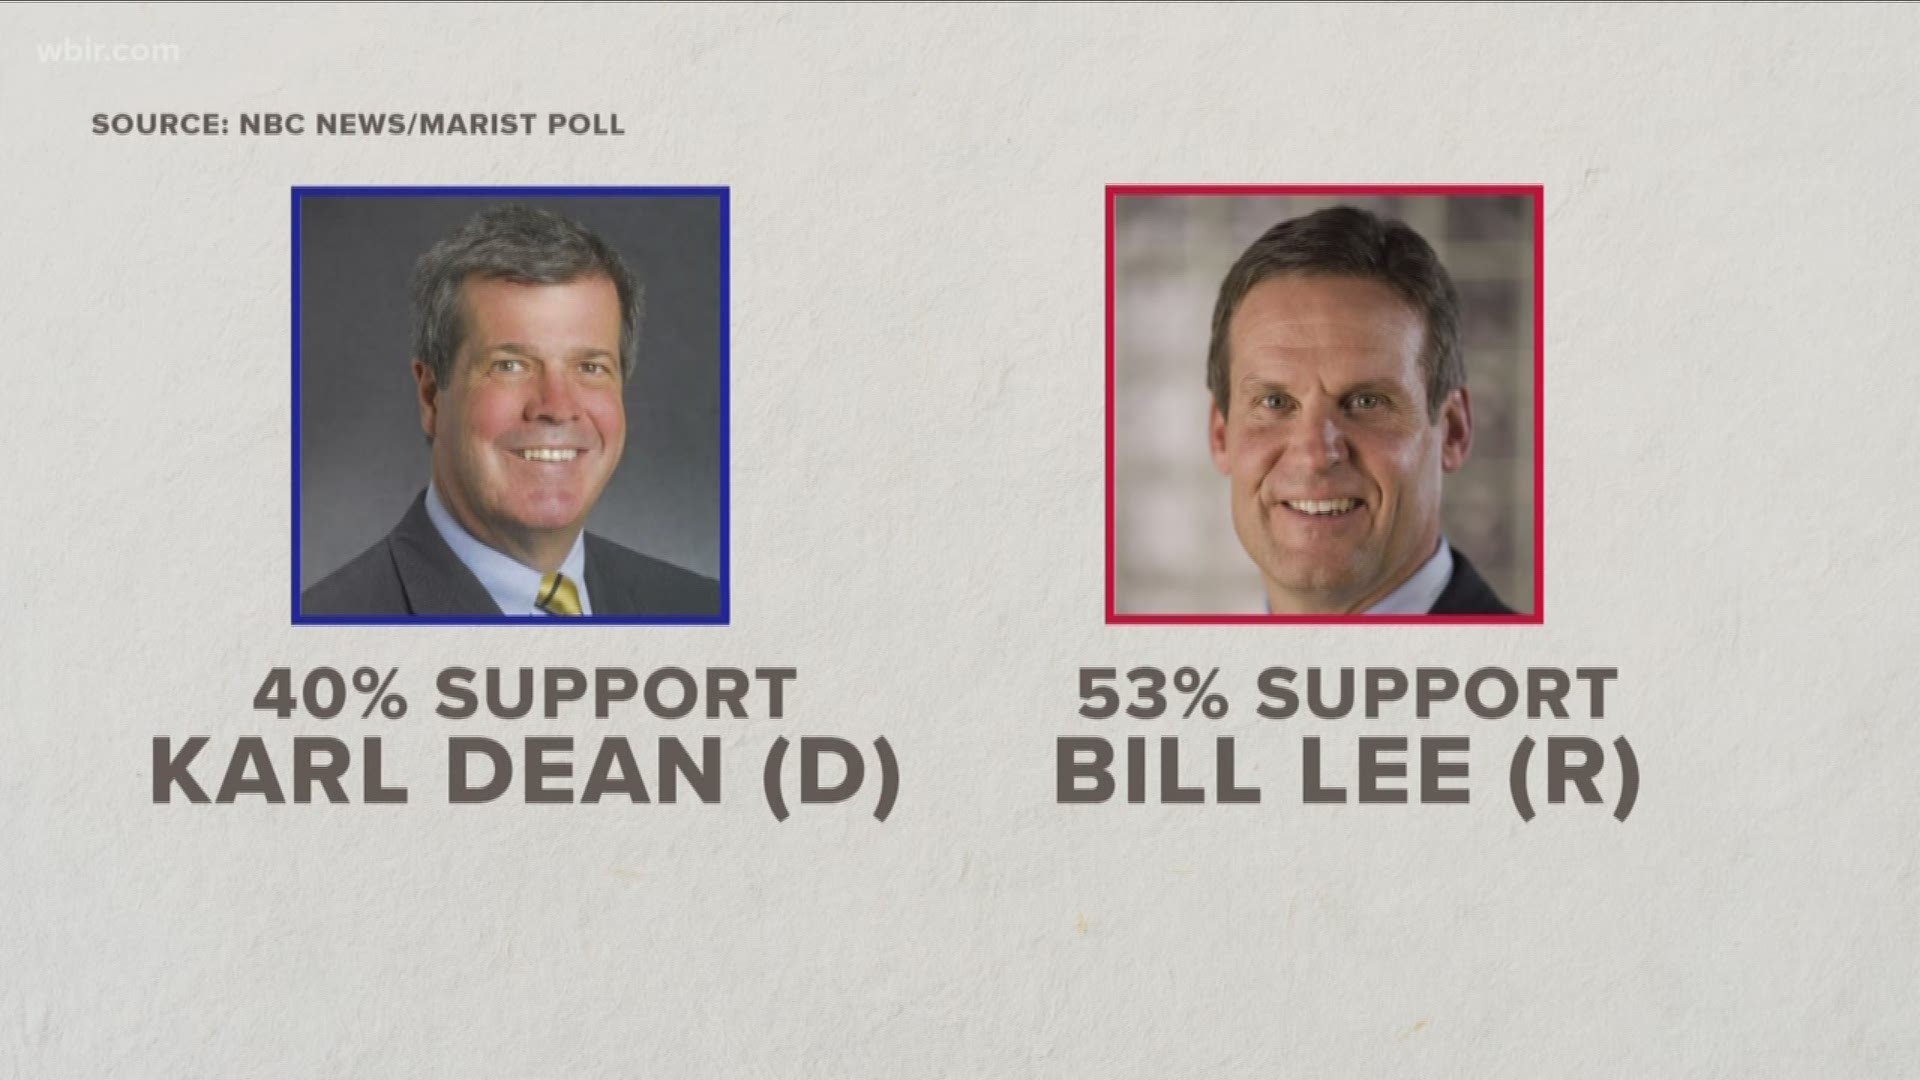 A new NBC News Marist Poll released in the last hour shows Republican Bill Lee has a double digit lead over Democrat Karl Dean in the race for governor.